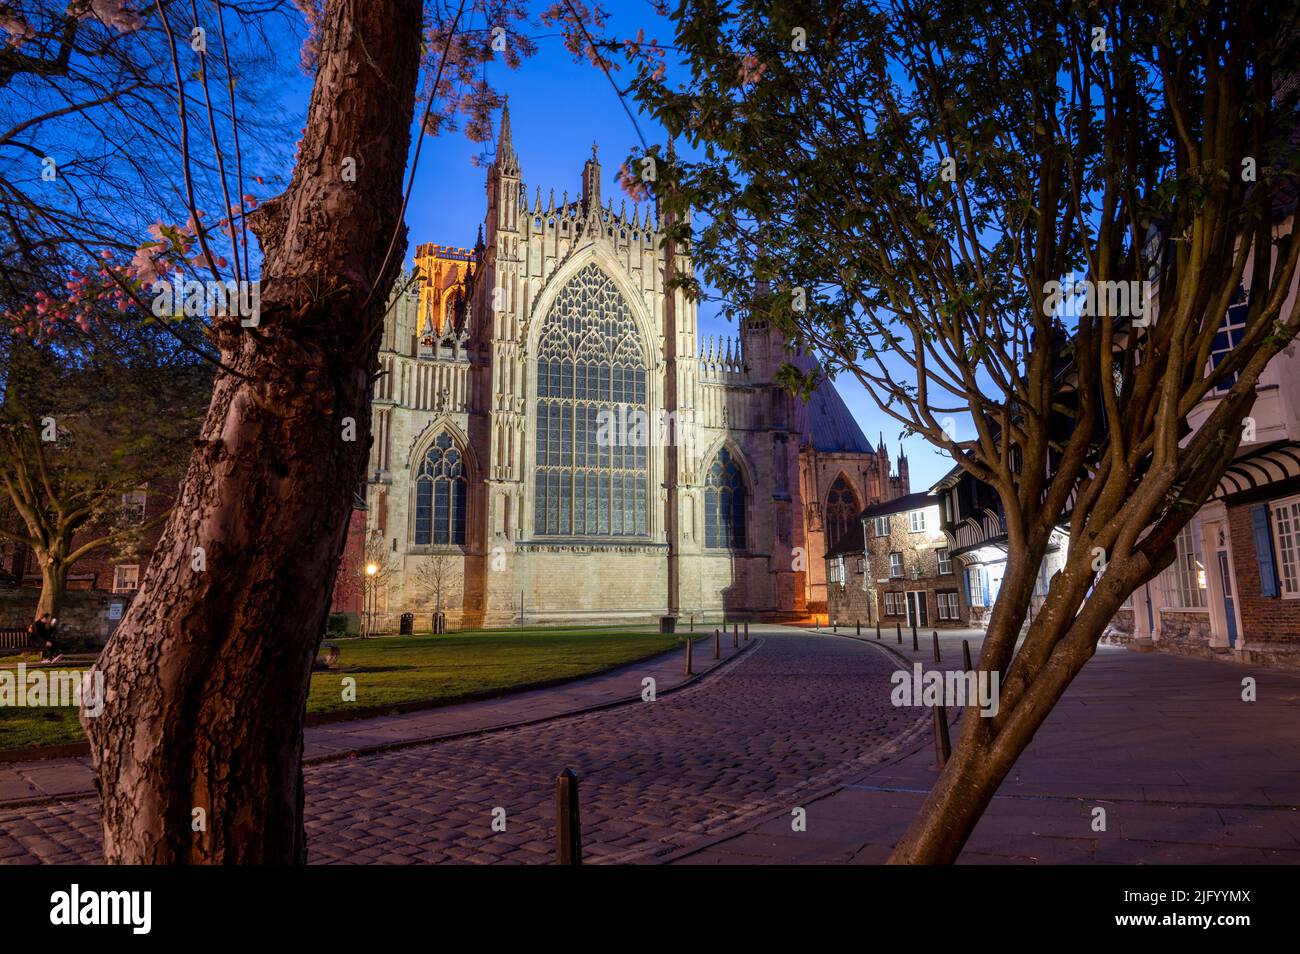 York Minster at night, viewed from College Street, City of York, Yorkshire, England, United Kingdom, Europe Stock Photo